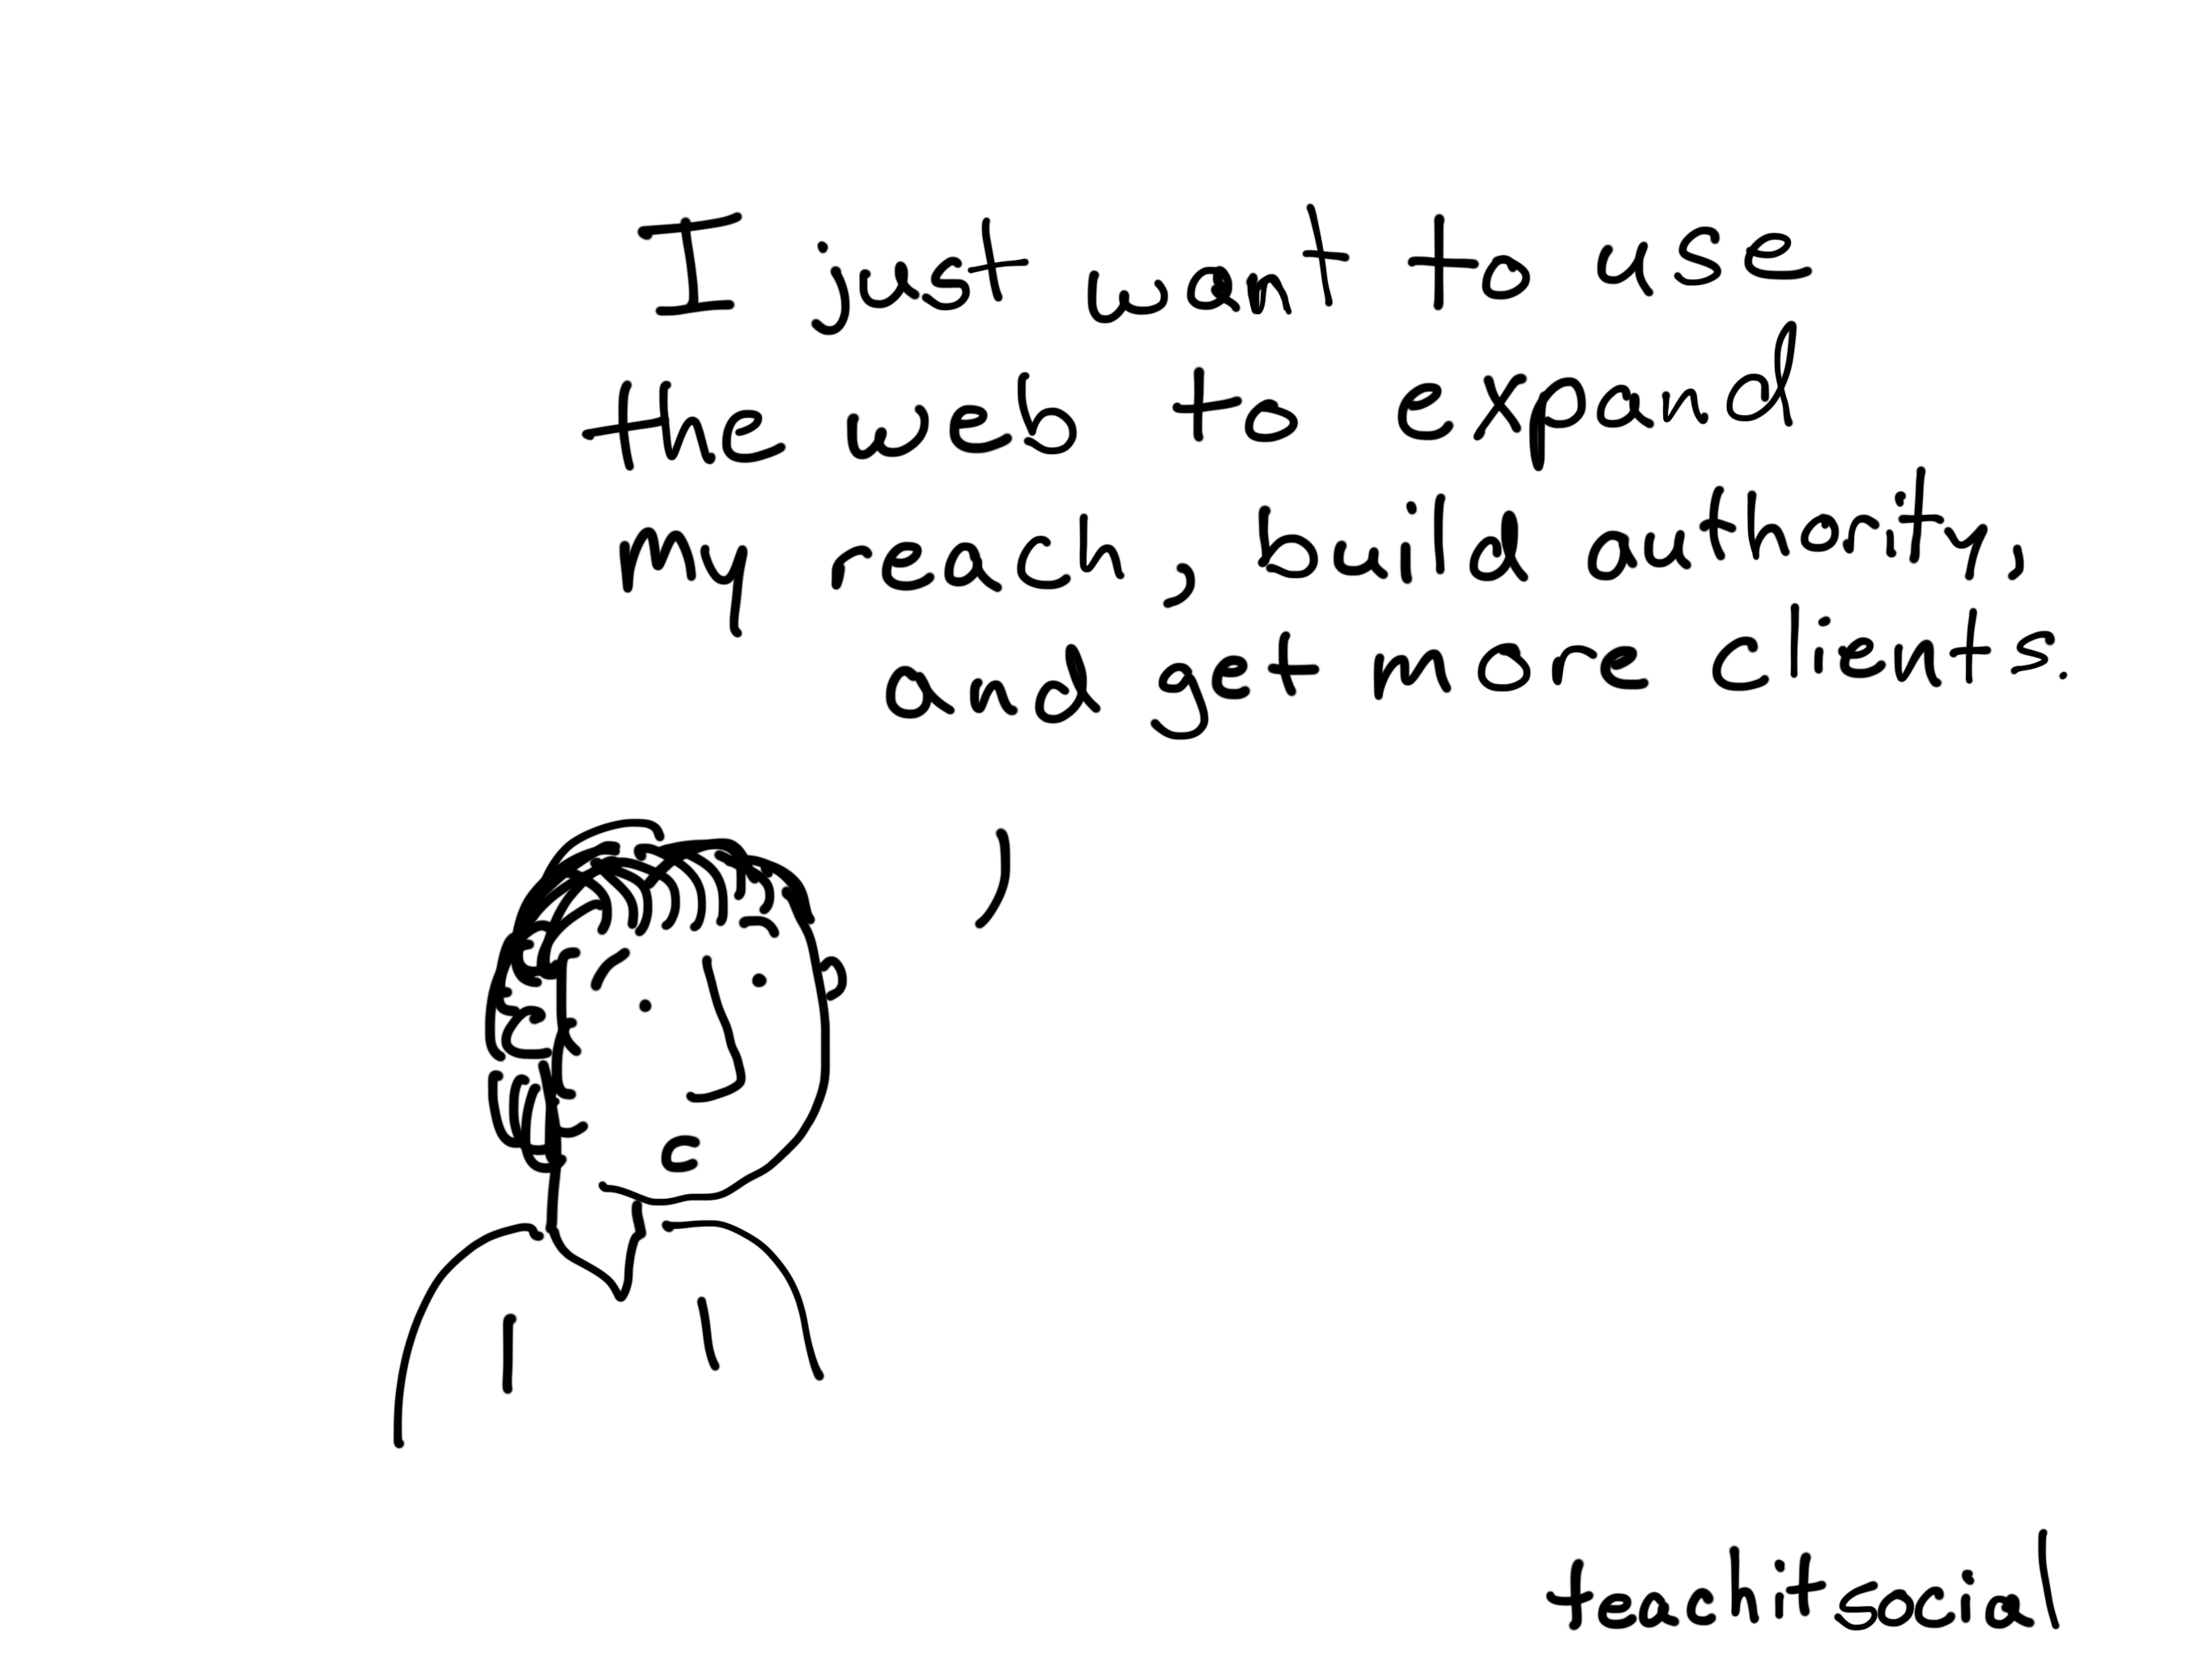 I just want to use the web to expand my reach, build authority, and get more clients.